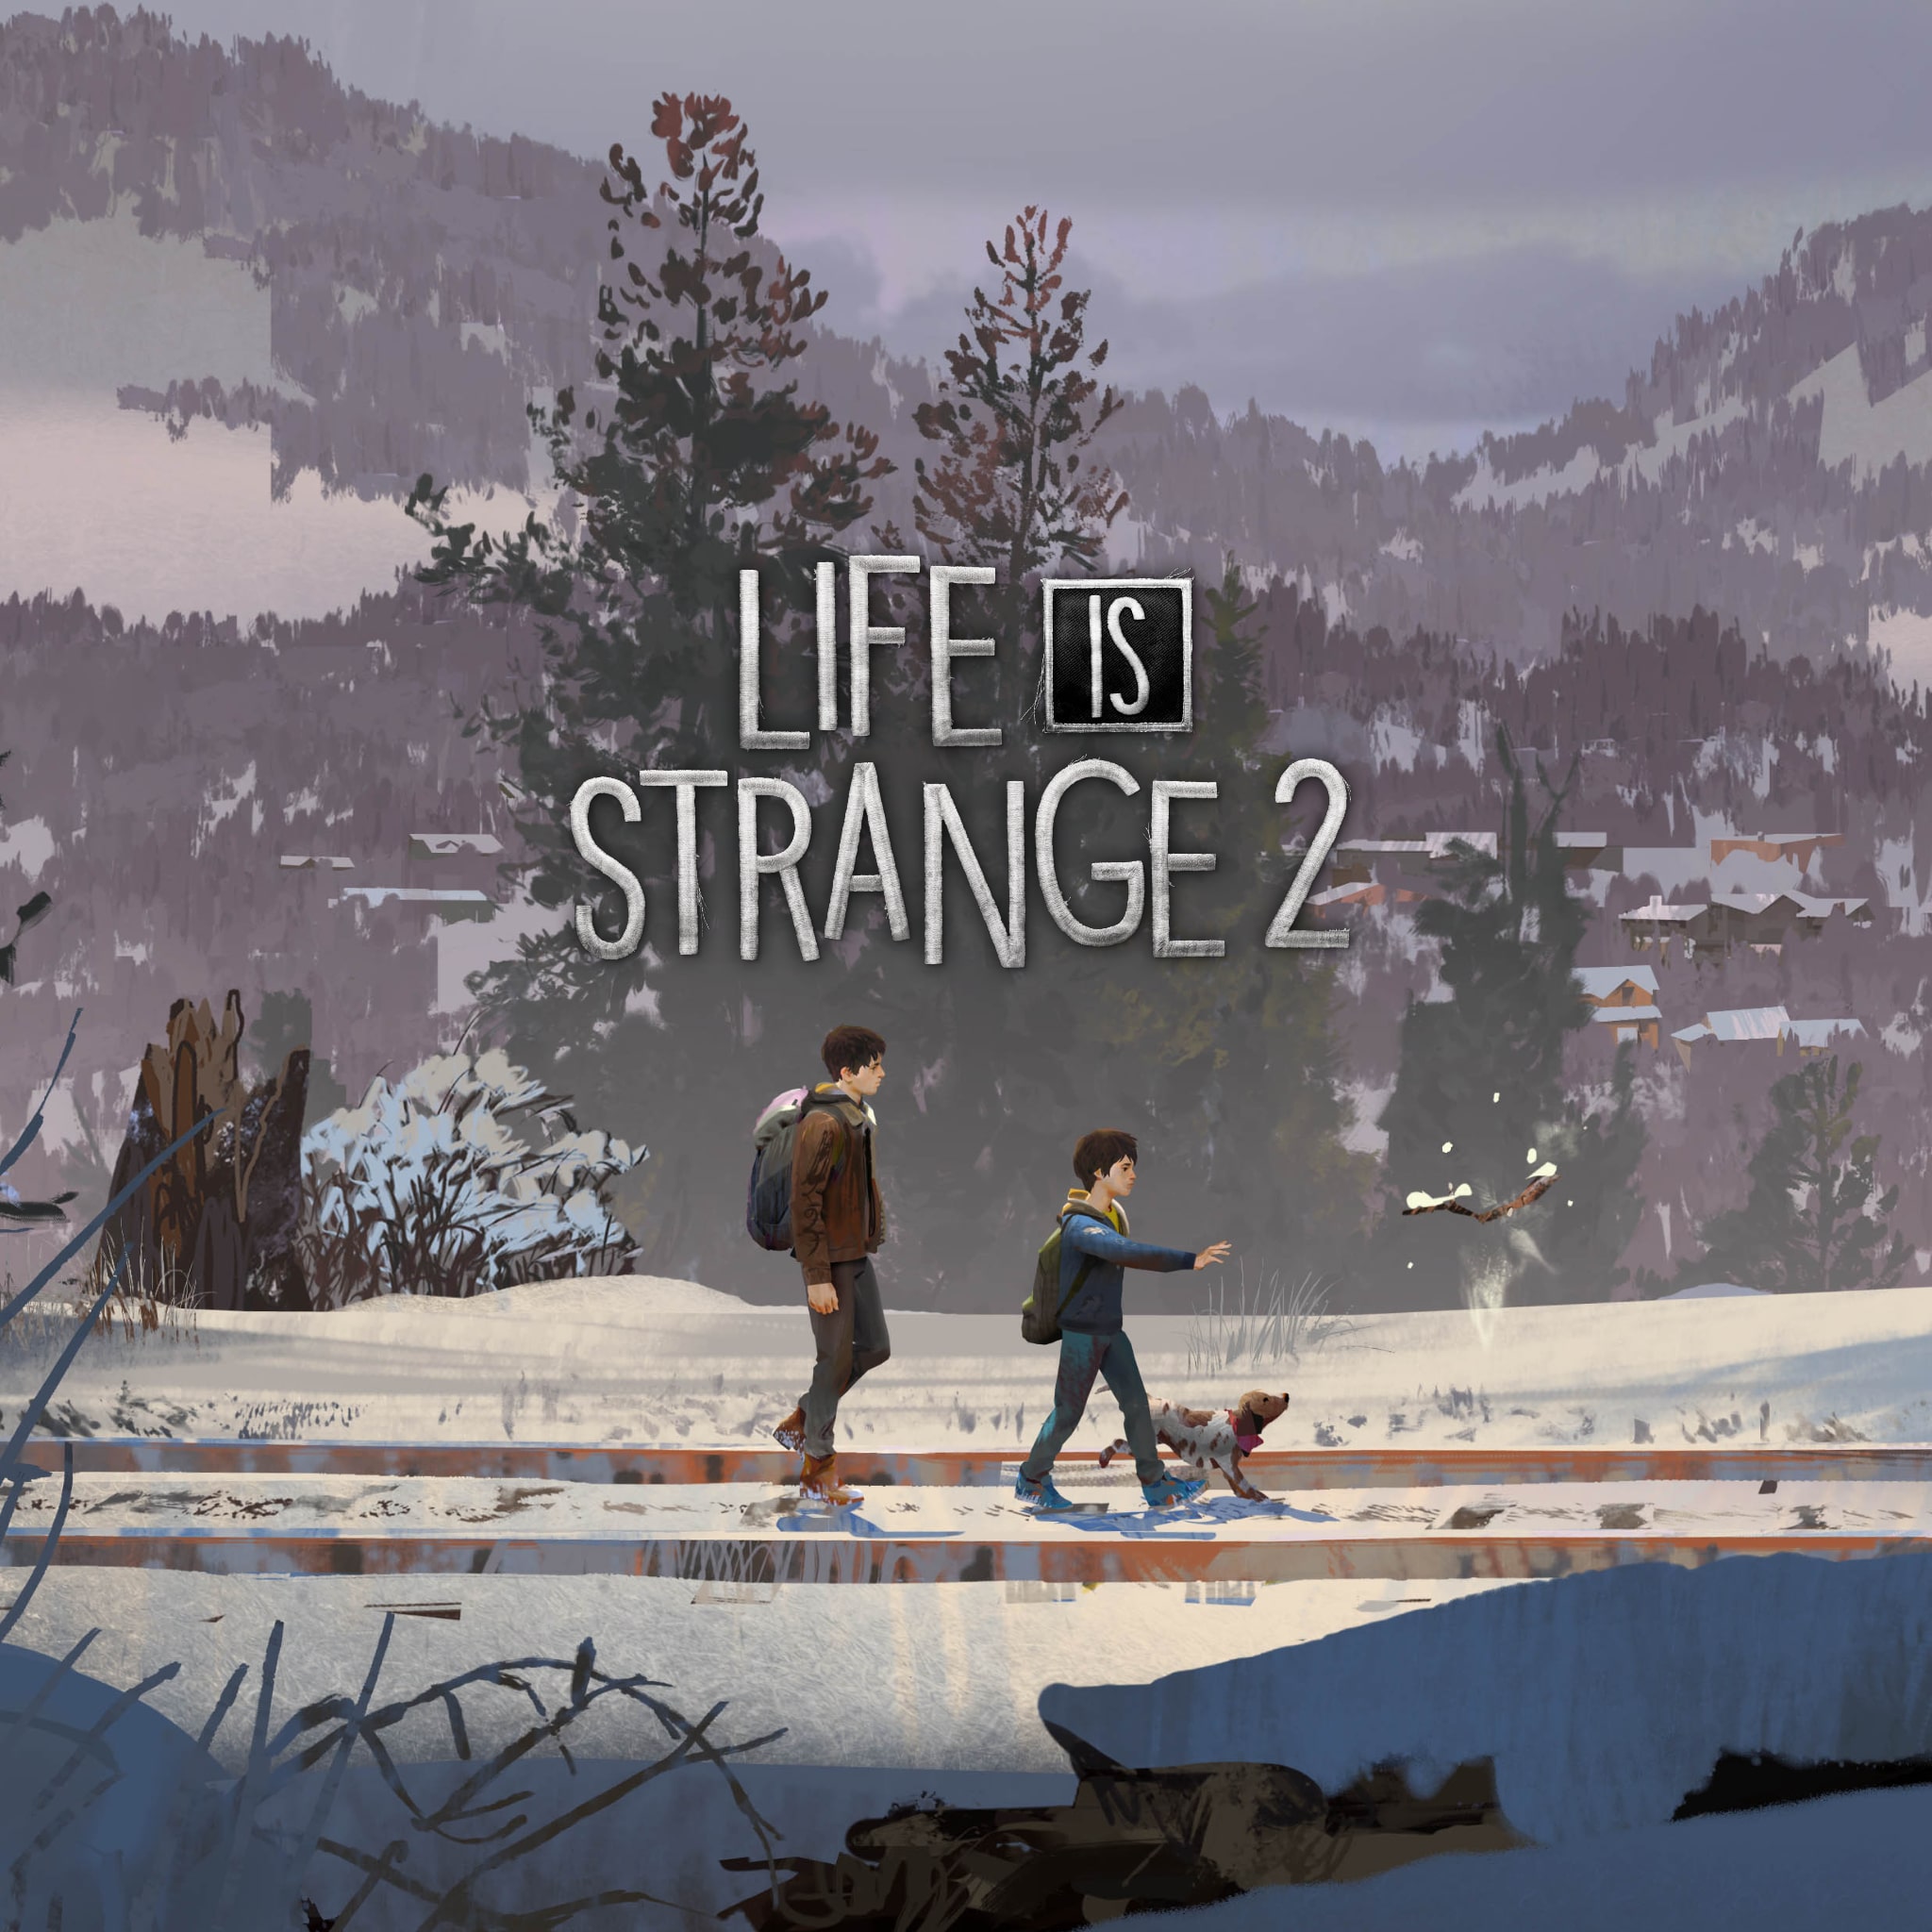 Life is Strange 2' will stay with you for a while